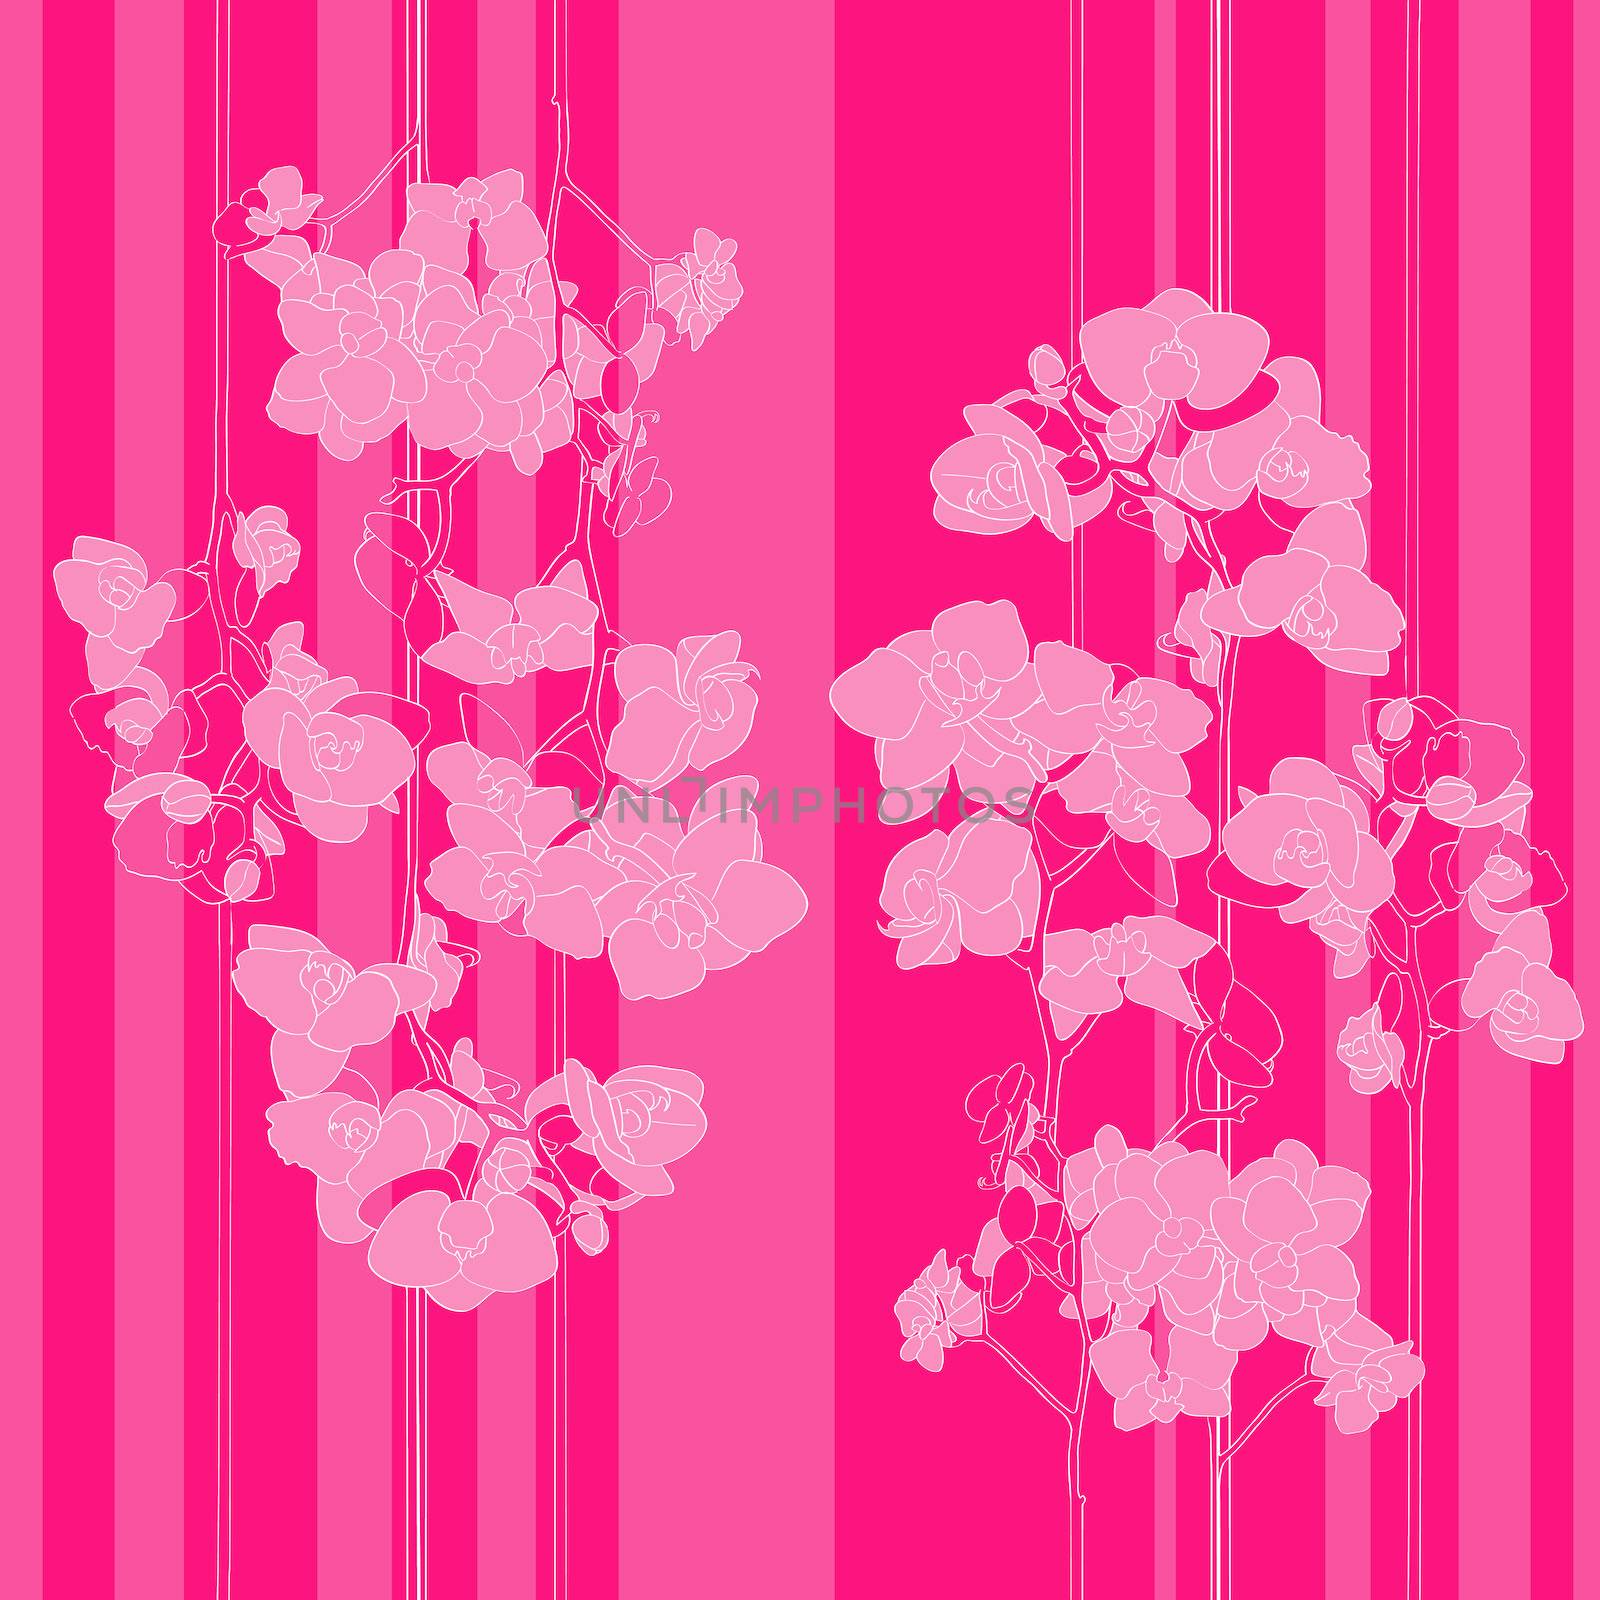 Seamless retro pattern with orchids and stripes over pink, hand drawn illustration of a new shabby chic motif with flowers